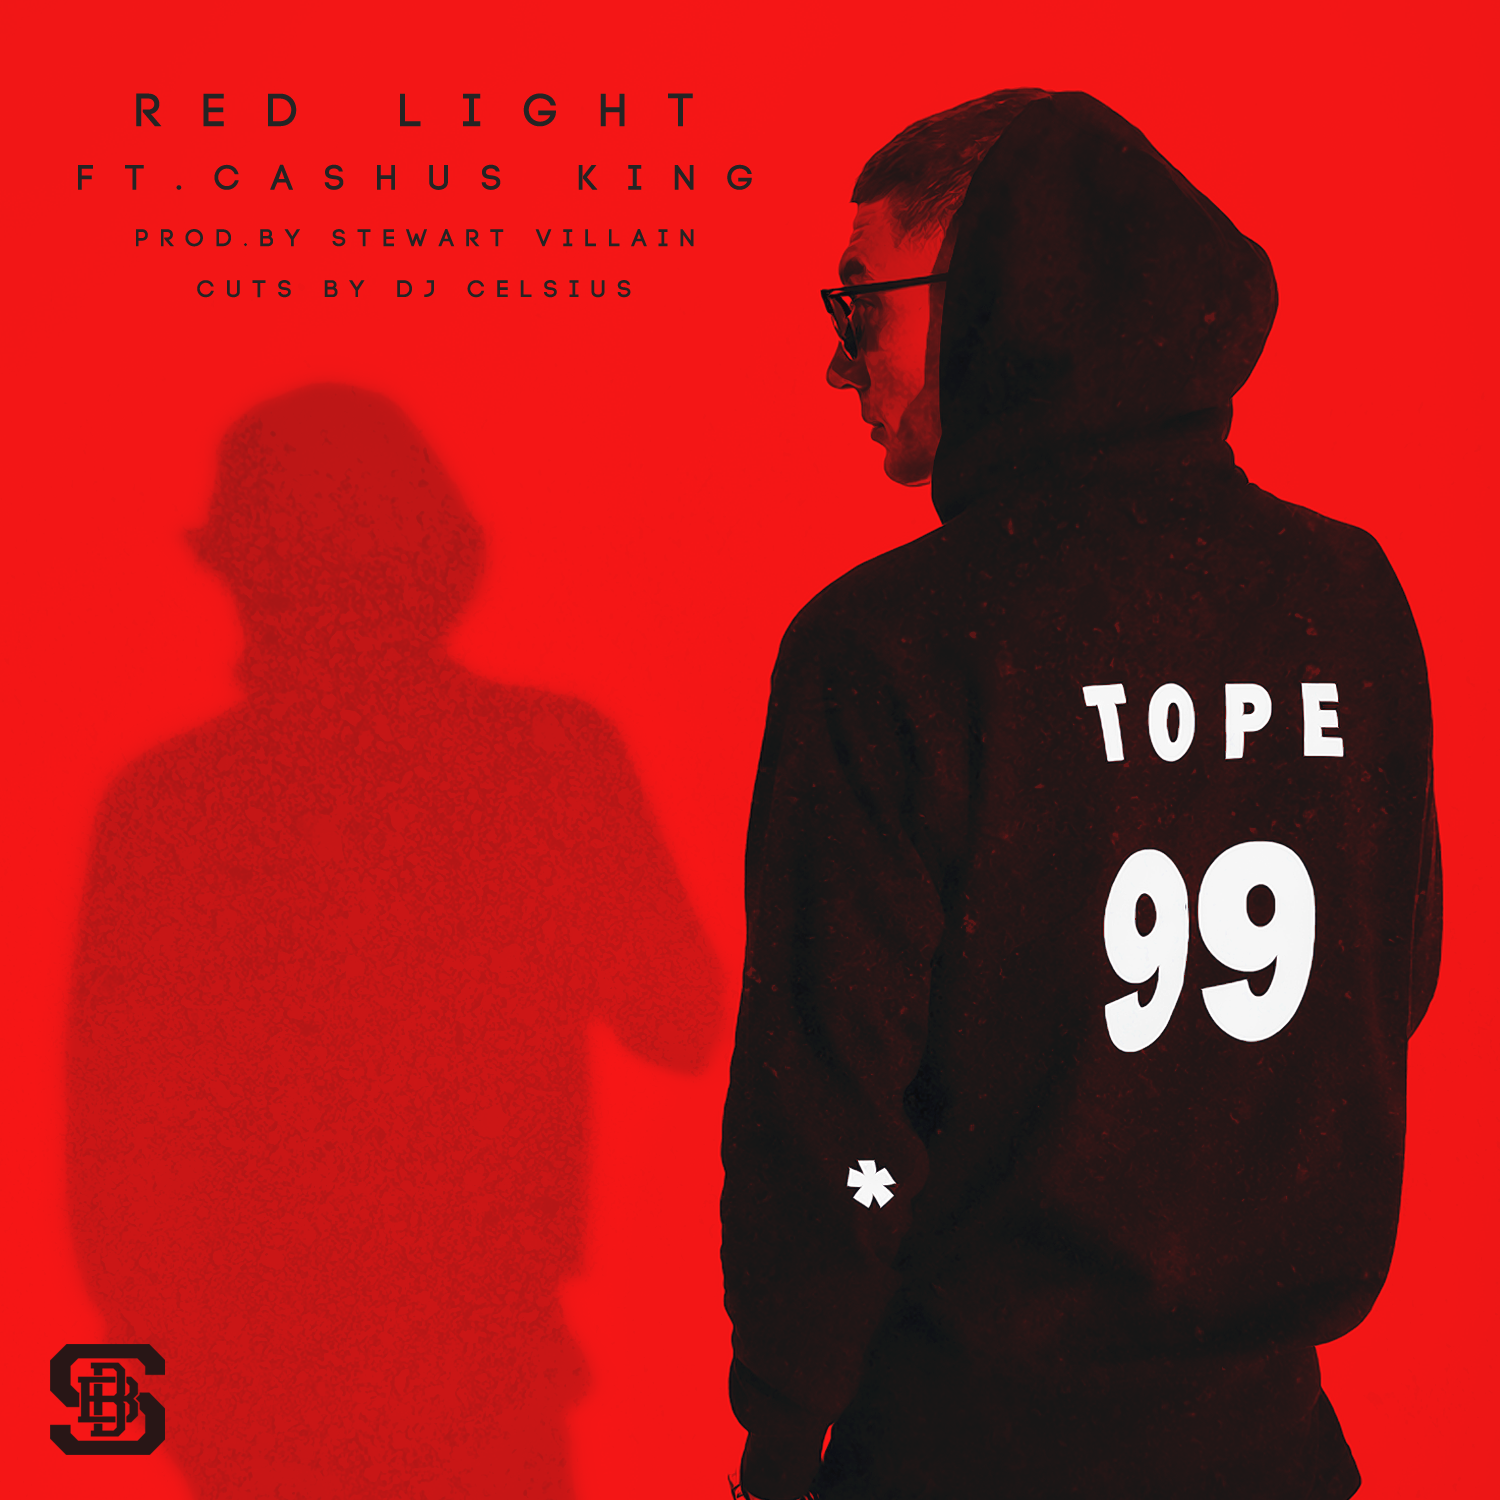 Tope: Red Light Feat. CashUs King